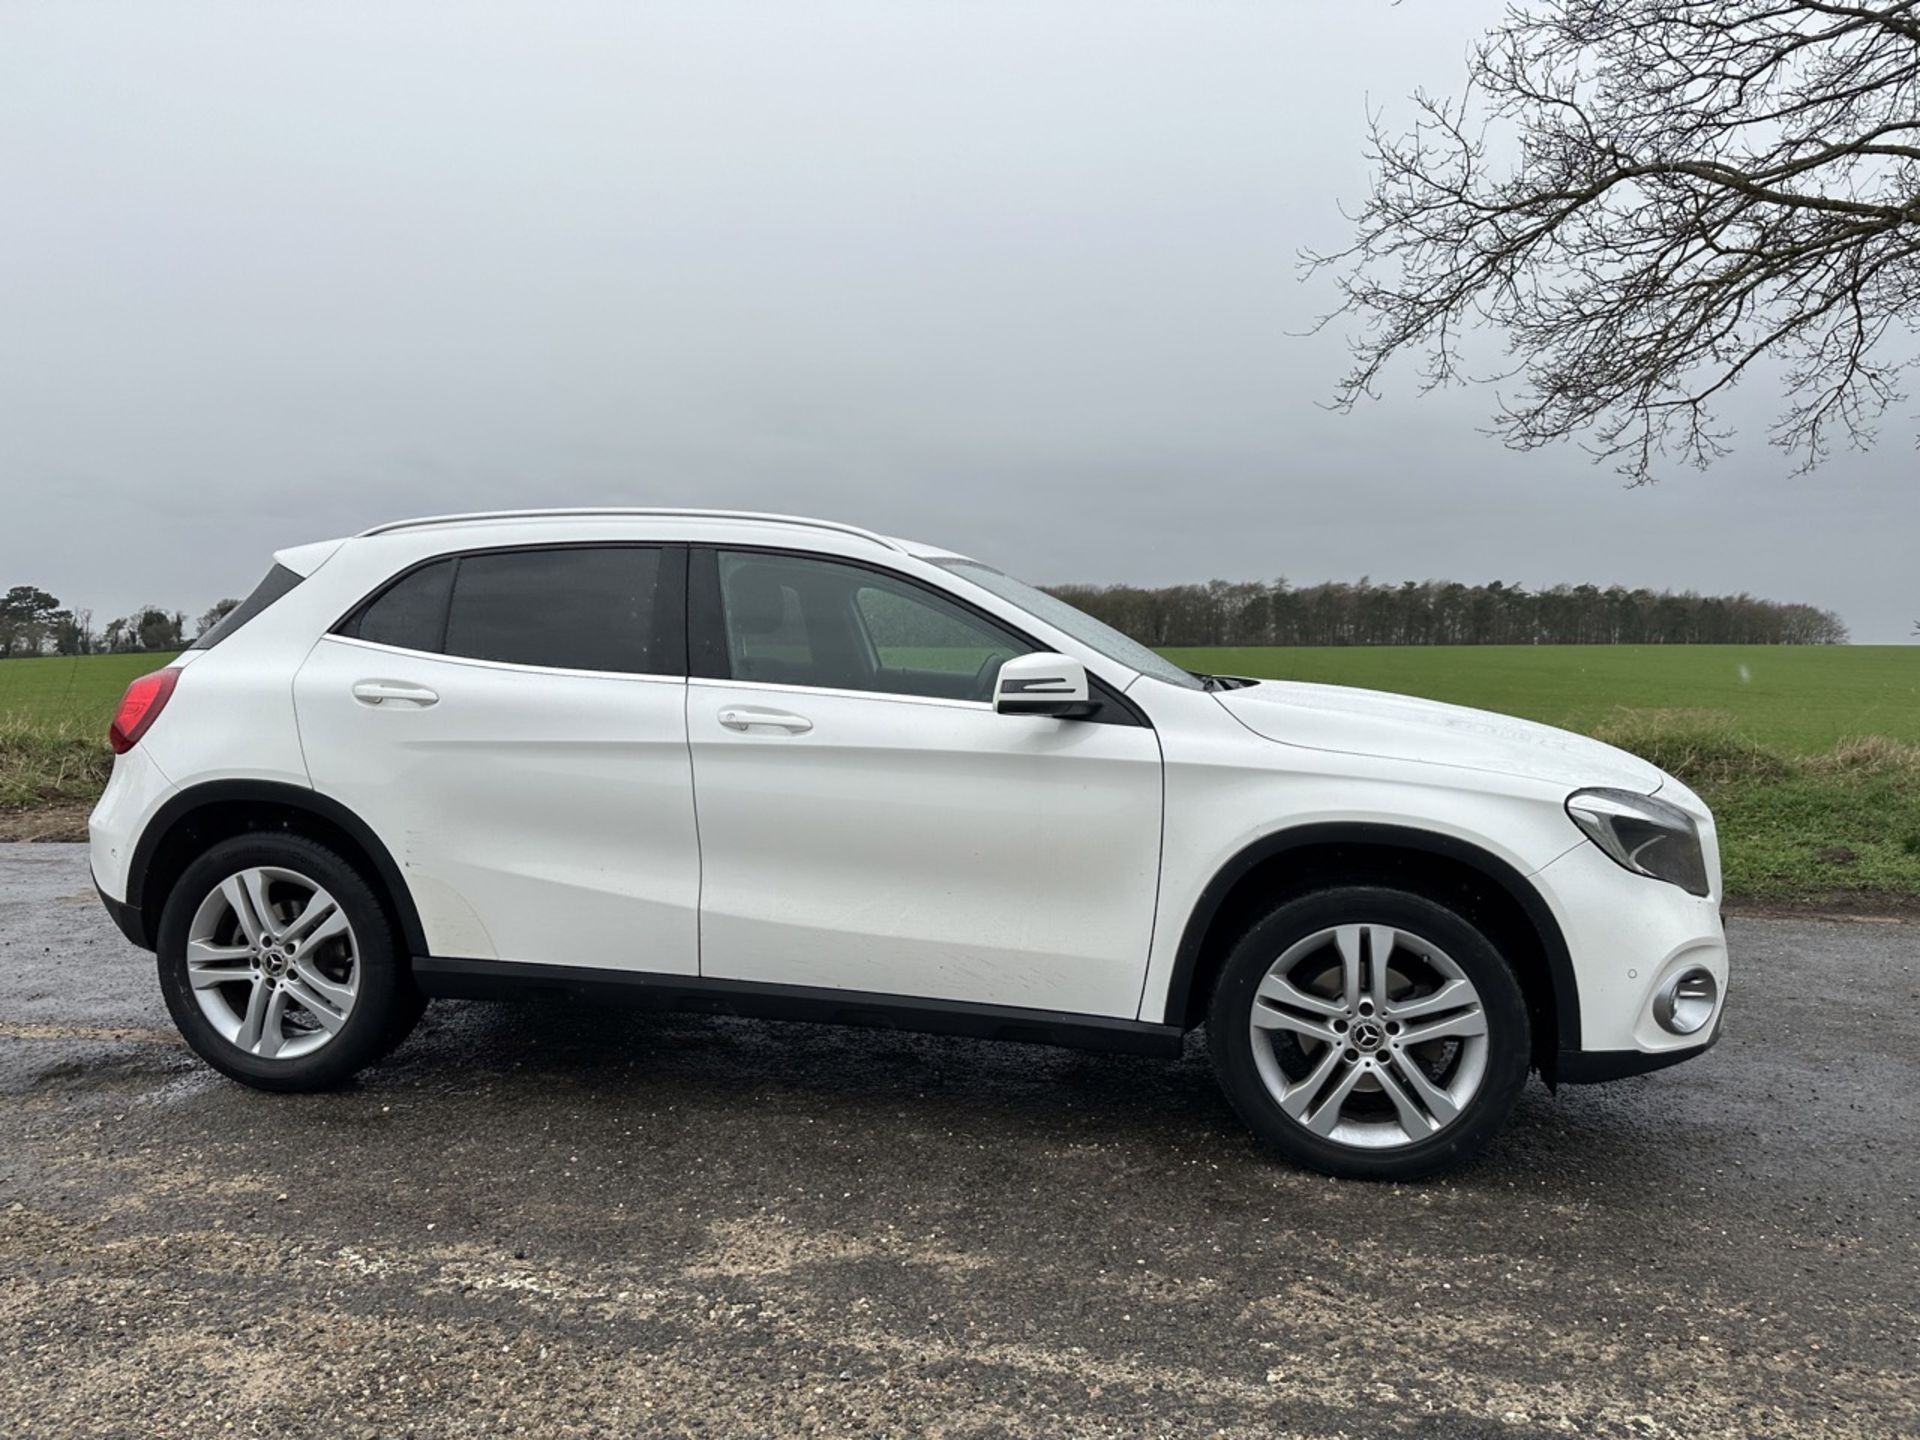 MERCEDES GLA 200d AUTO "SPORT EXECUTIVE" 2019 MODEL - LEATHER - LOW MILES - AIR CON - Image 2 of 17